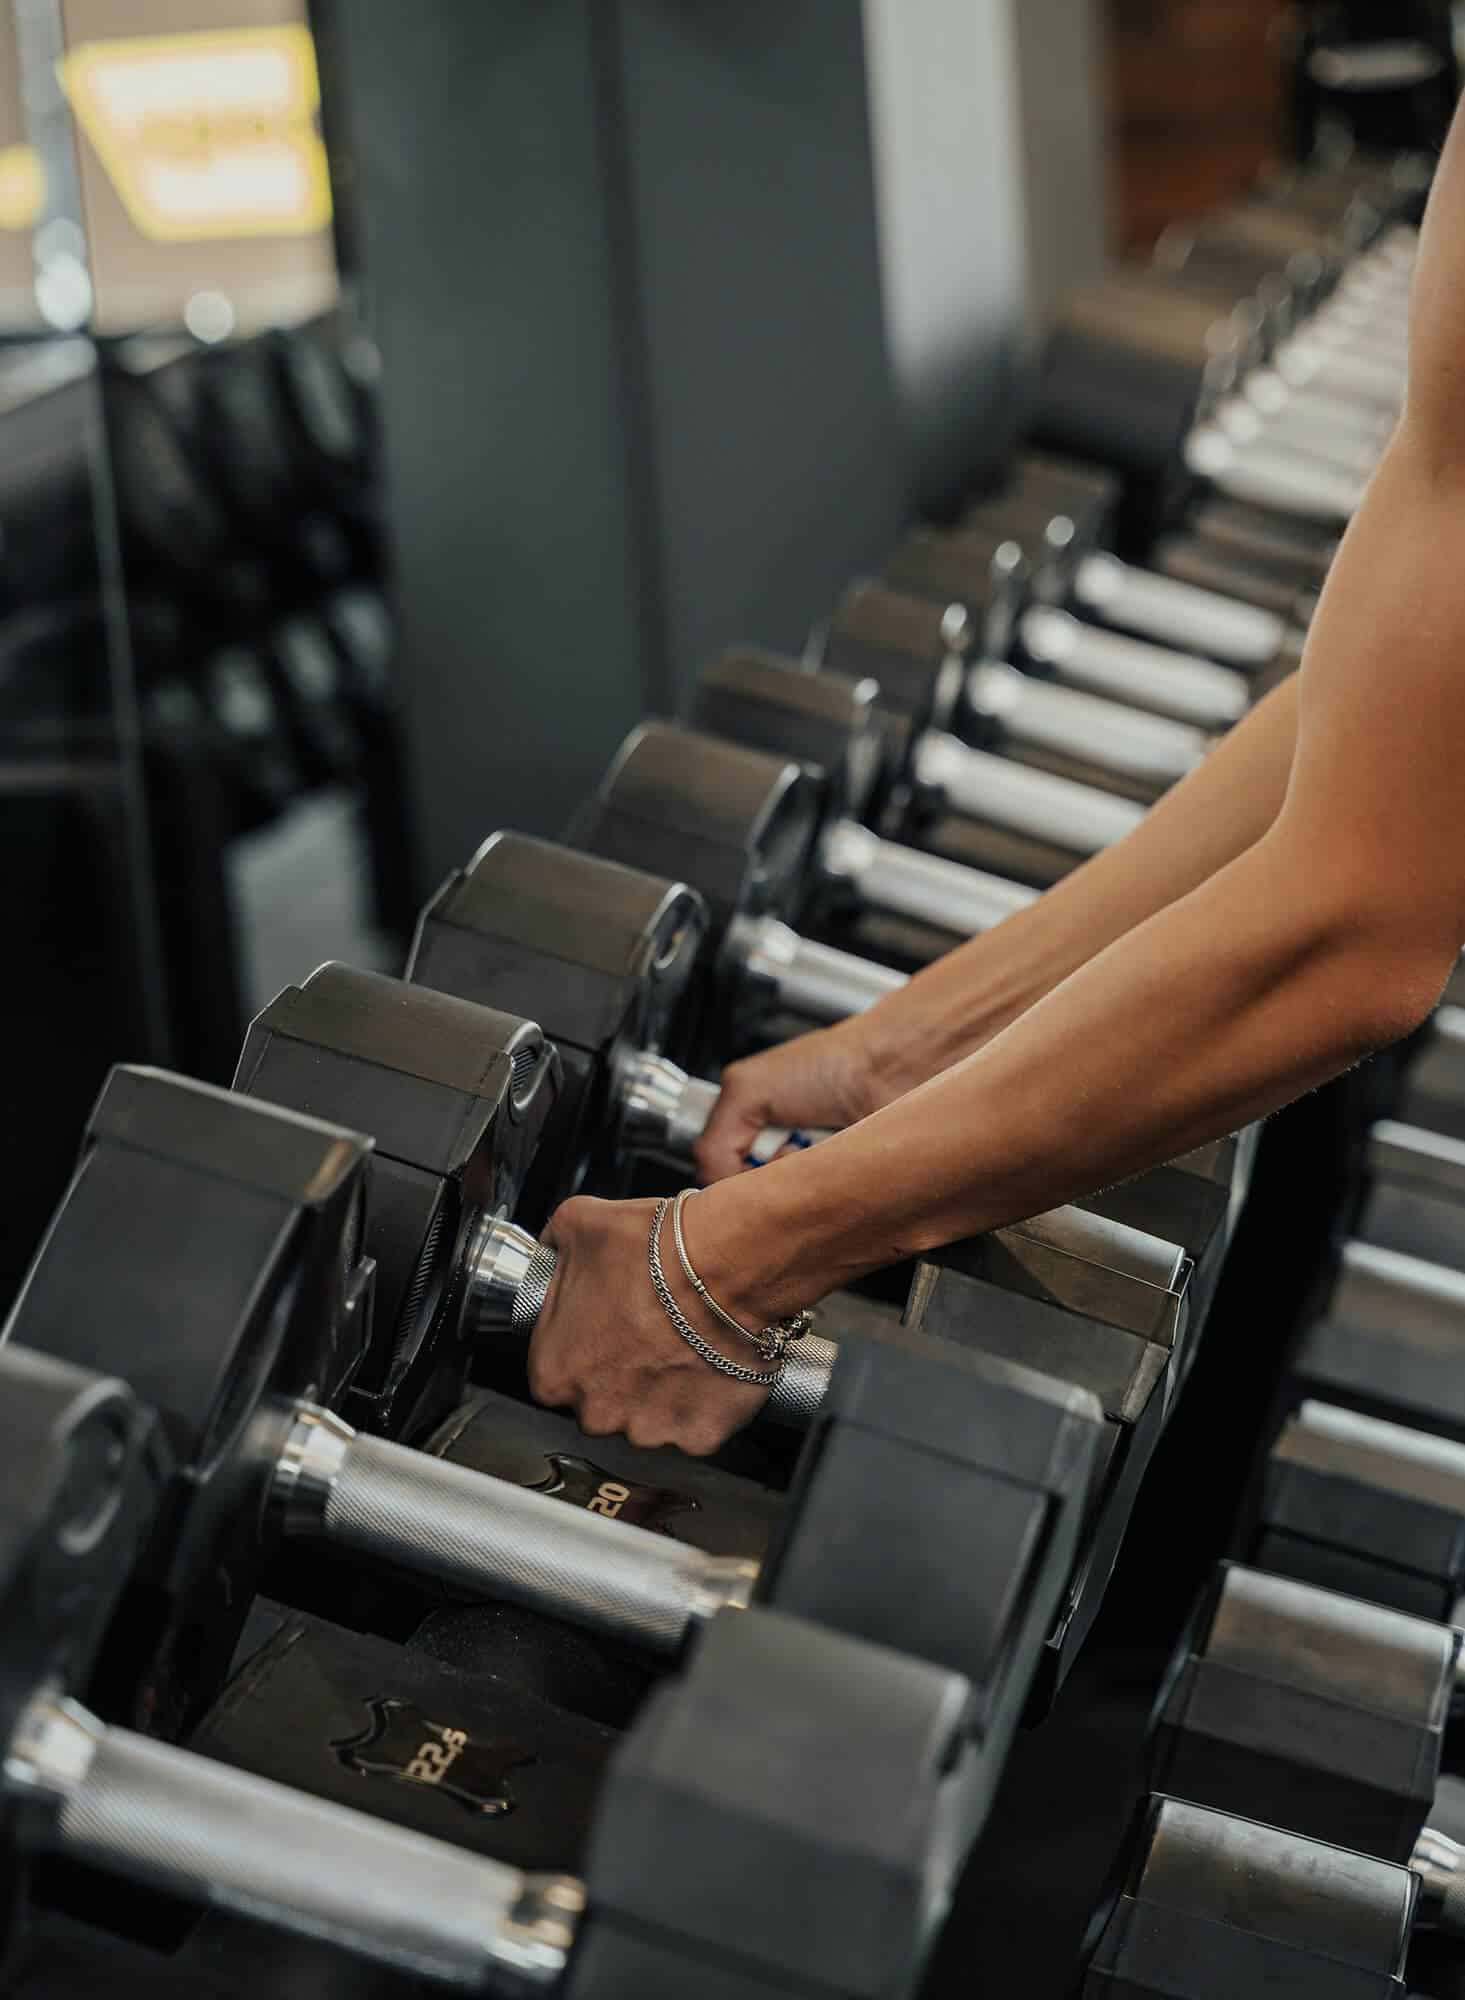 Person grabbing two dumbbells from a row of dumbbells depicting the active lifestyle at Flora apartments in summerville sc - roberto shumski o EjUZo8AKk unsplash